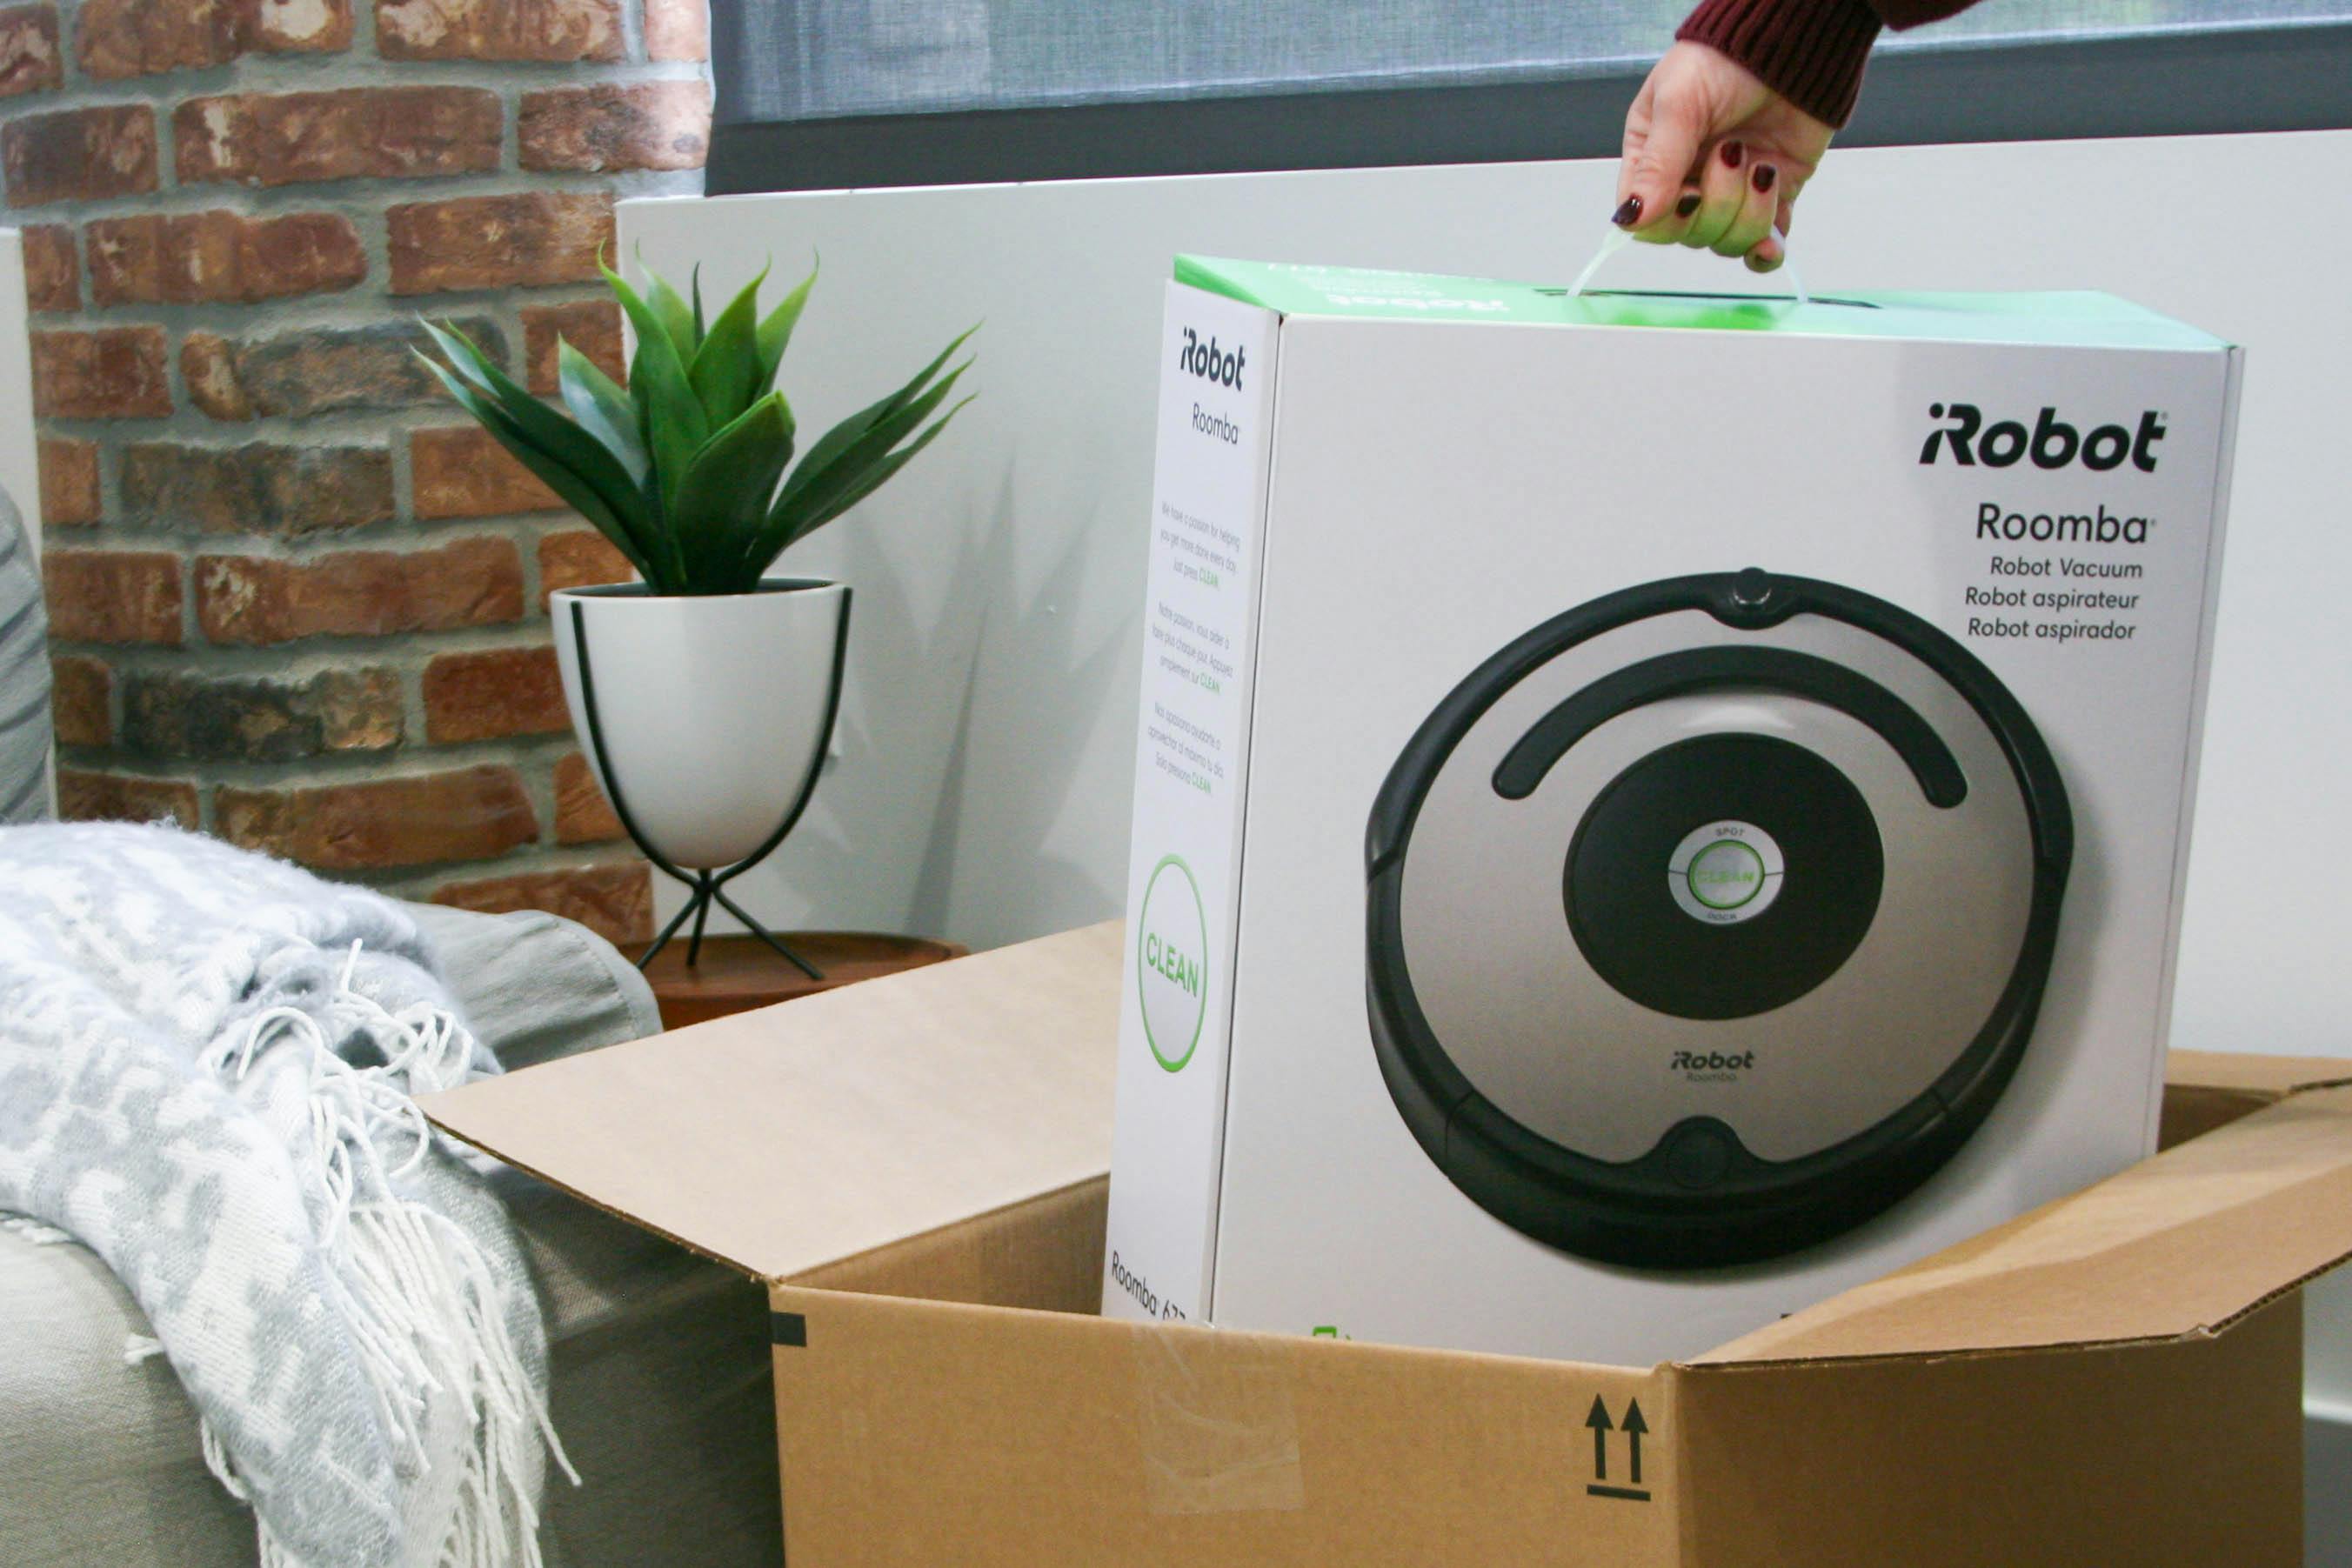 A person's hand lifting an iRobot Roomba out of a box.